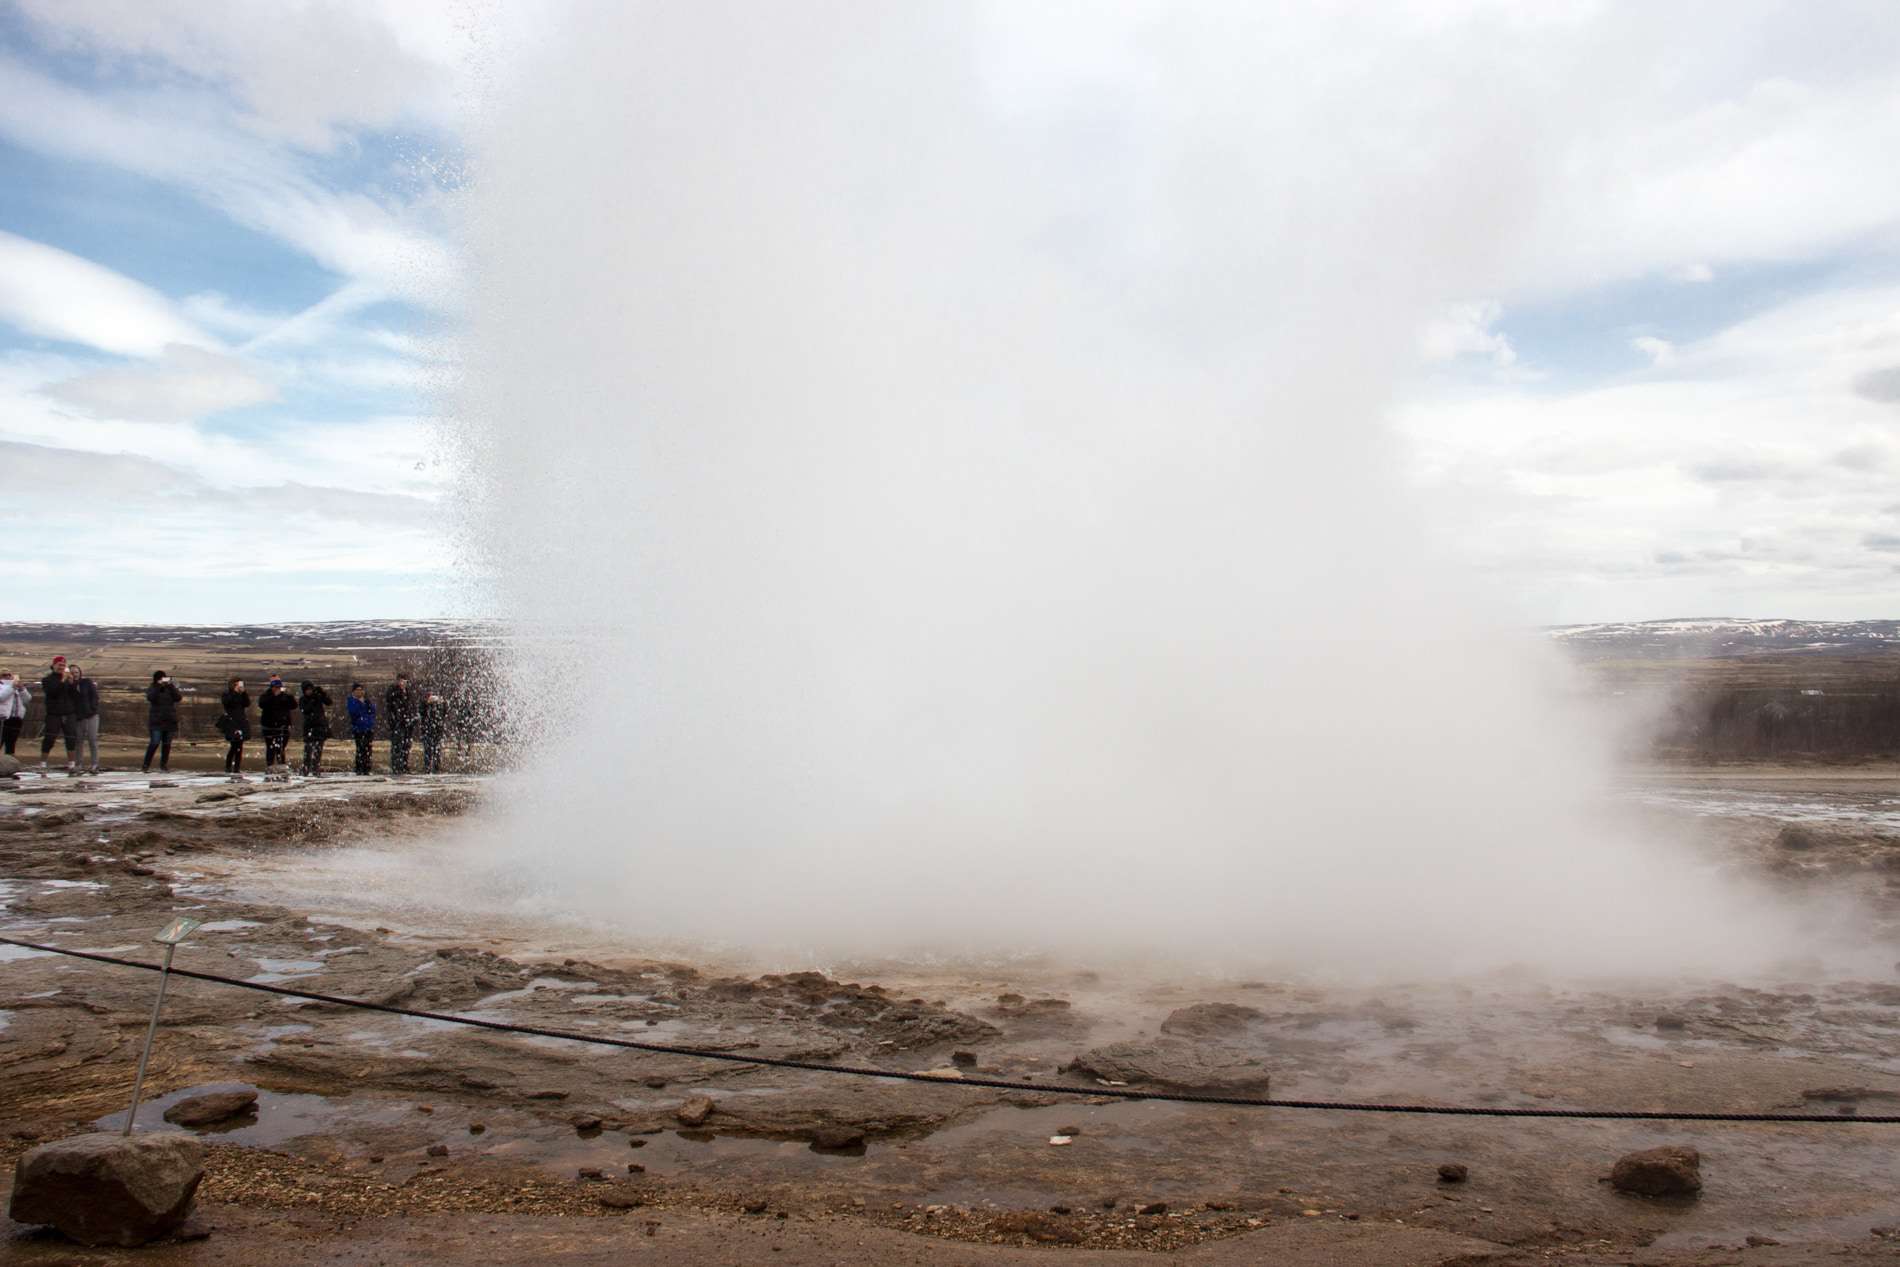 A burst of earm water shoots from the hole in the ground at the Geysir geothermal area in Iceland.